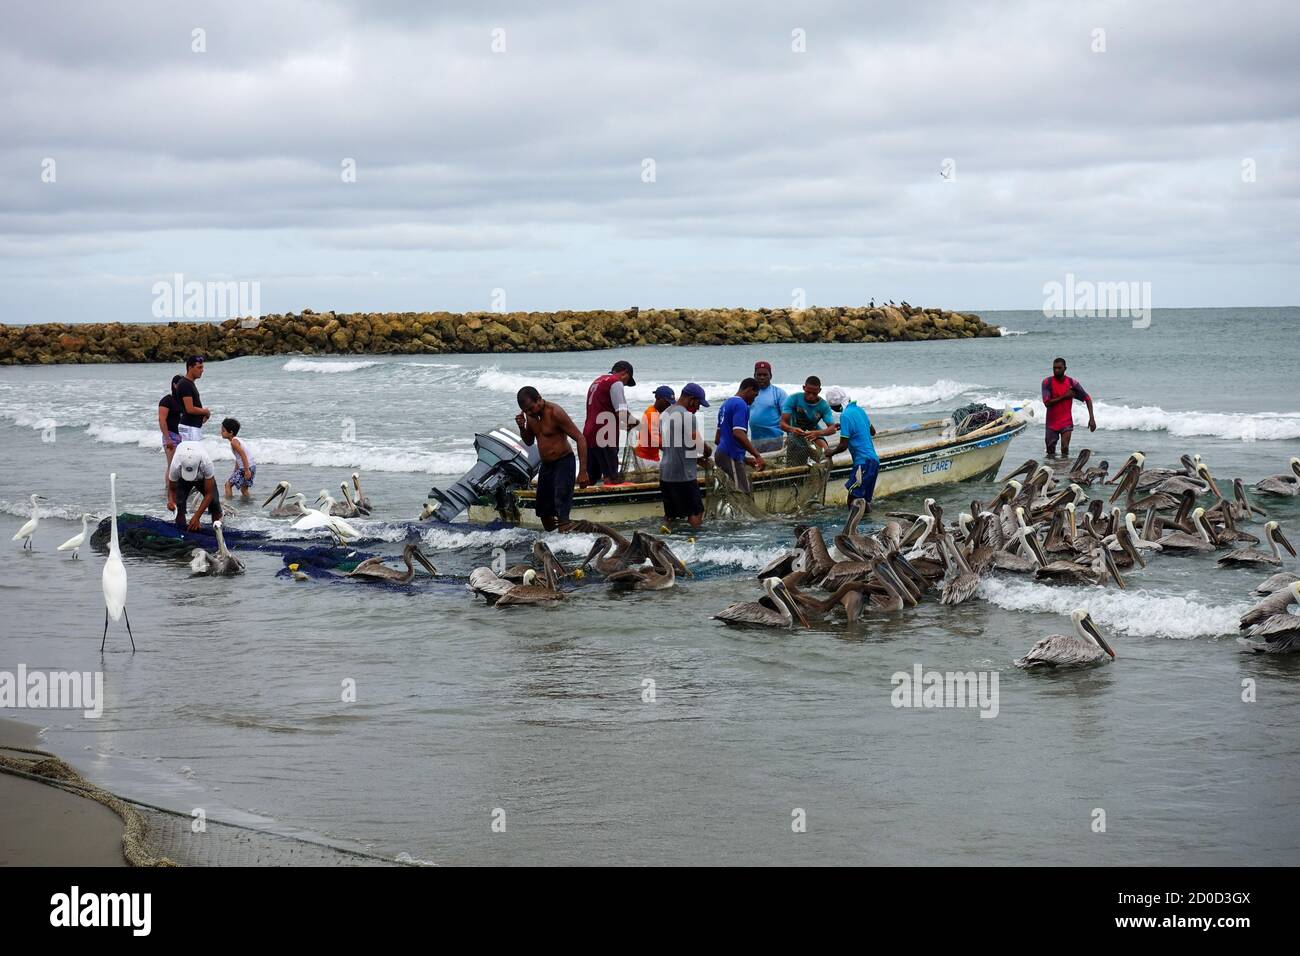 Cartagena, Bolívar/ Colombia; 09/30/2020: Fisher bringing the nets in at Bocagrande beach. Men working in artisanal fishing followed by pelican 2020 Stock Photo